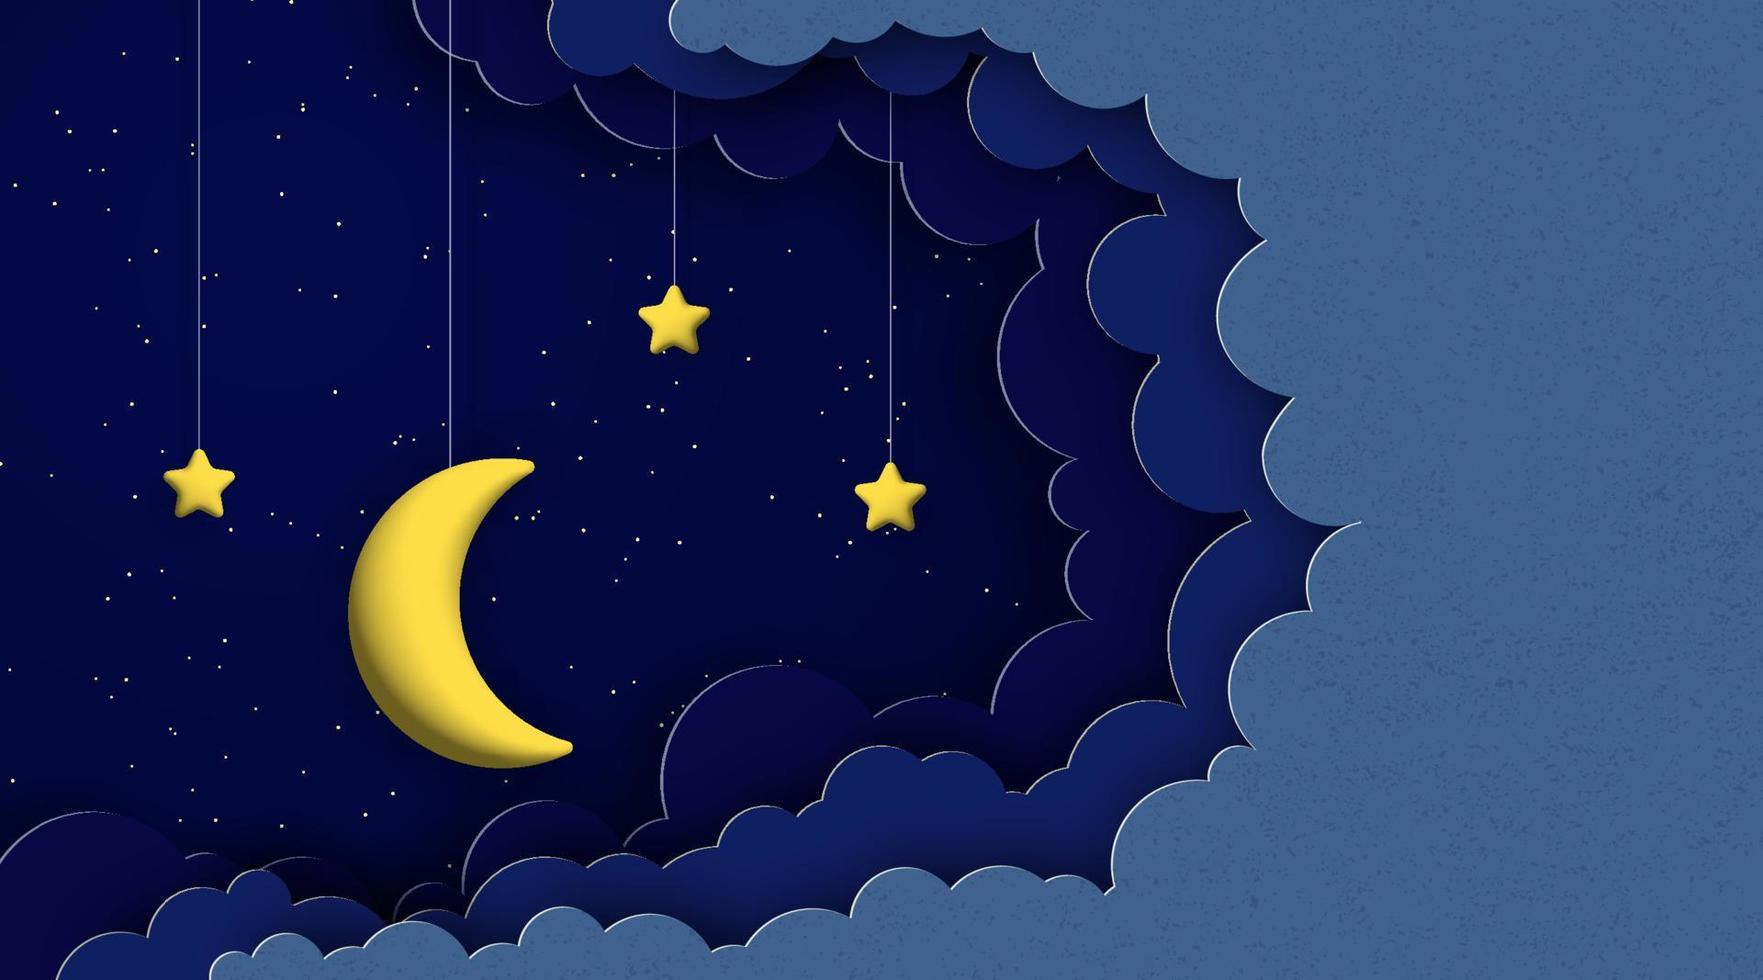 3d moon and stars on clouds and night starry sky background. vector